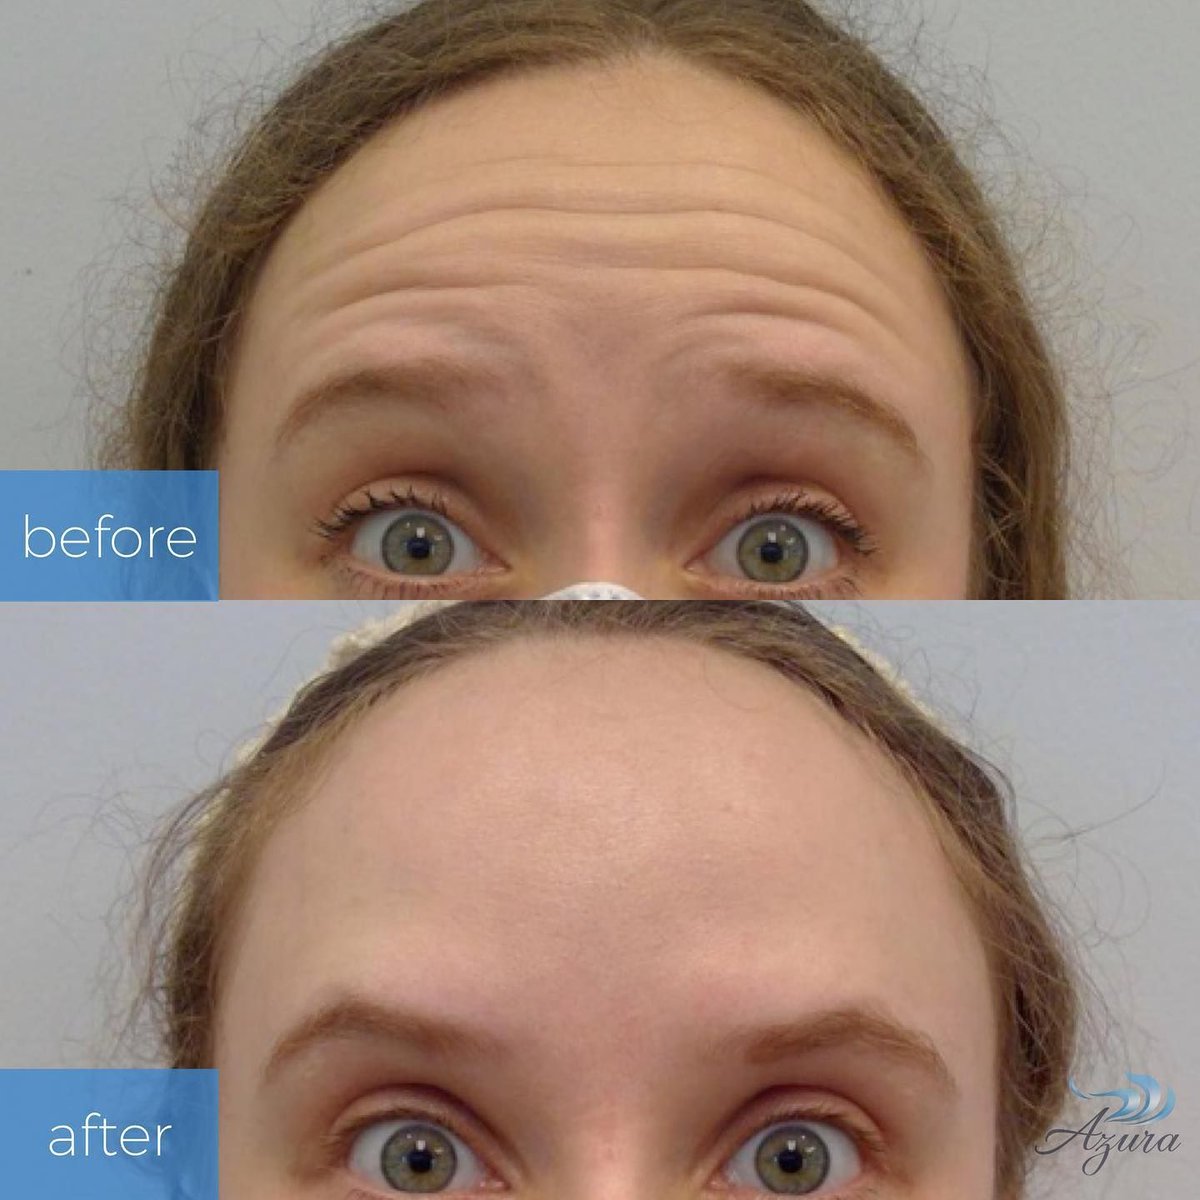 Wave goodbye to wrinkles and say hello to youthful radiance! Explore our gallery of before-and-after photos at buff.ly/3vRkiF4.

#botox #wrinkles #dysport #injectables #medspa #yourenewed #skincare #azura #medspa #cary #carync #raleigh #raleighnc